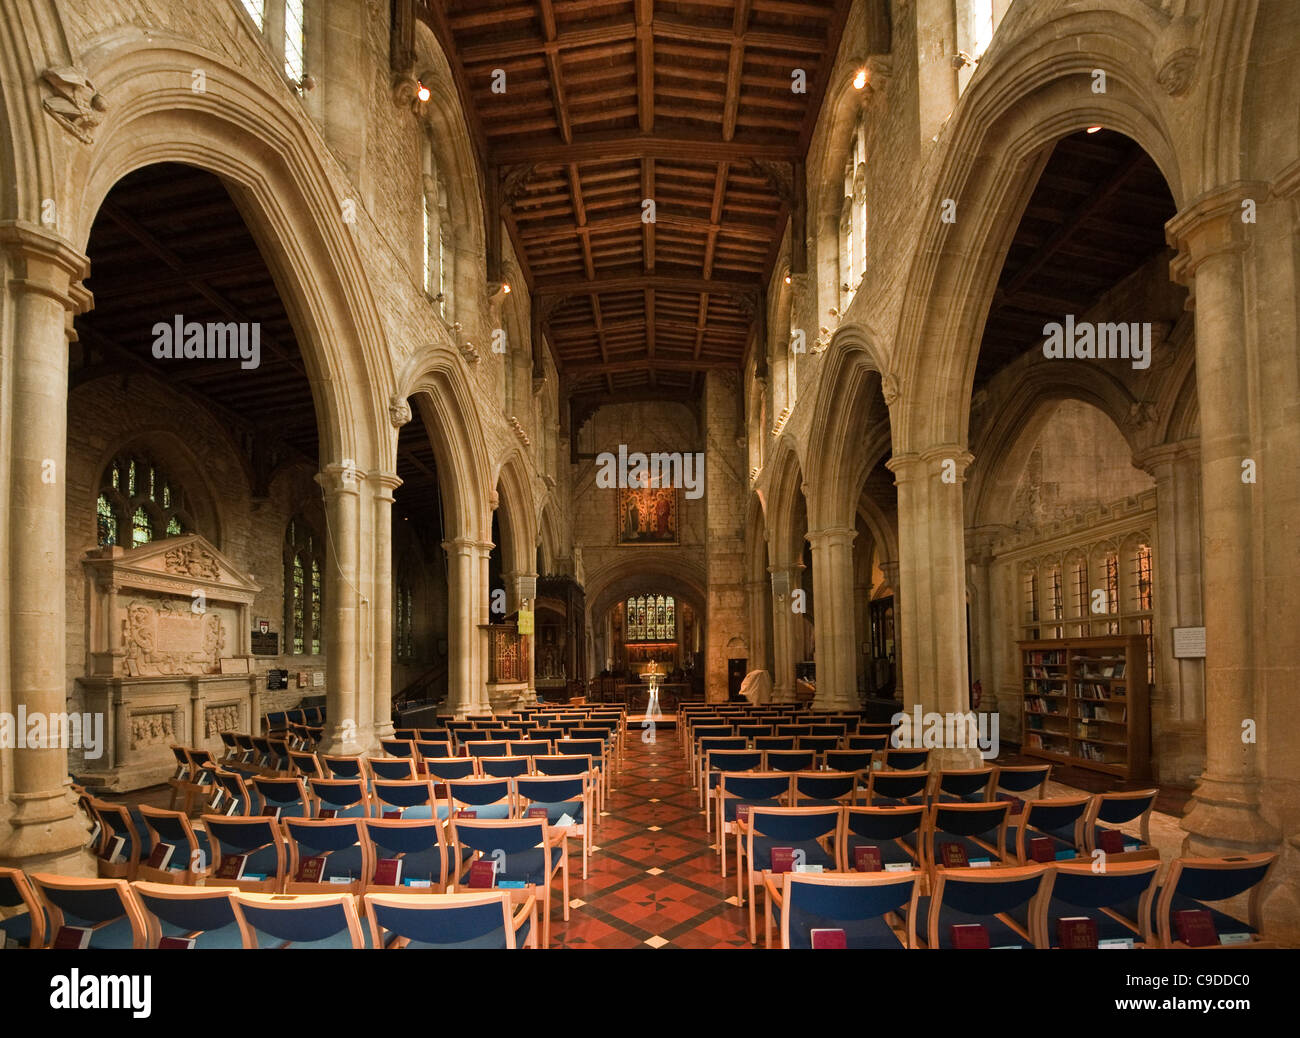 St John the Baptist Church Burford in the Cotswolds - Interior. The church is Anglican. Stock Photo